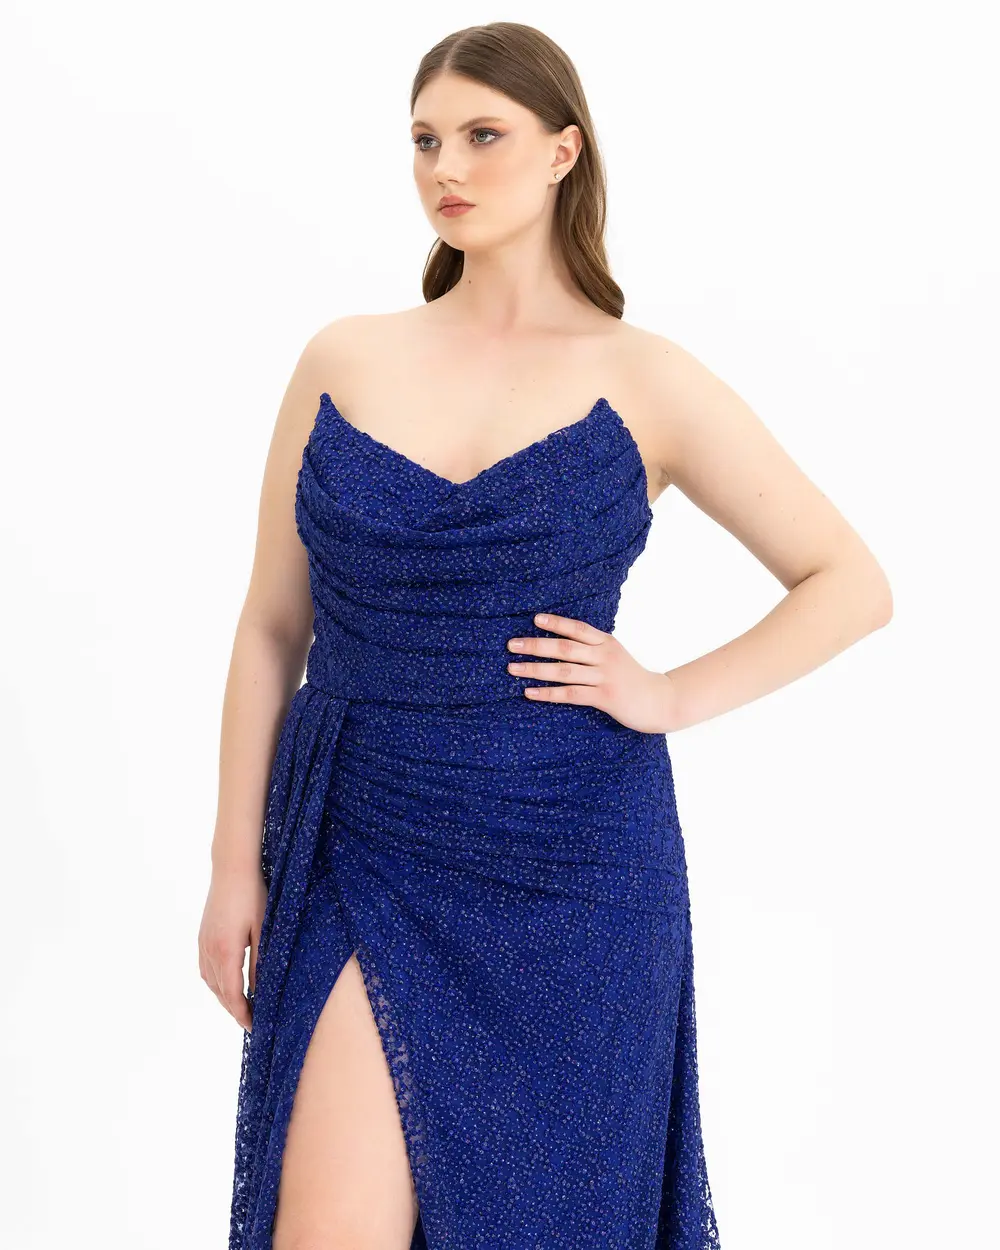  PLUS SIZE STRAPLES DRAPED BRODE EVENING DRESS